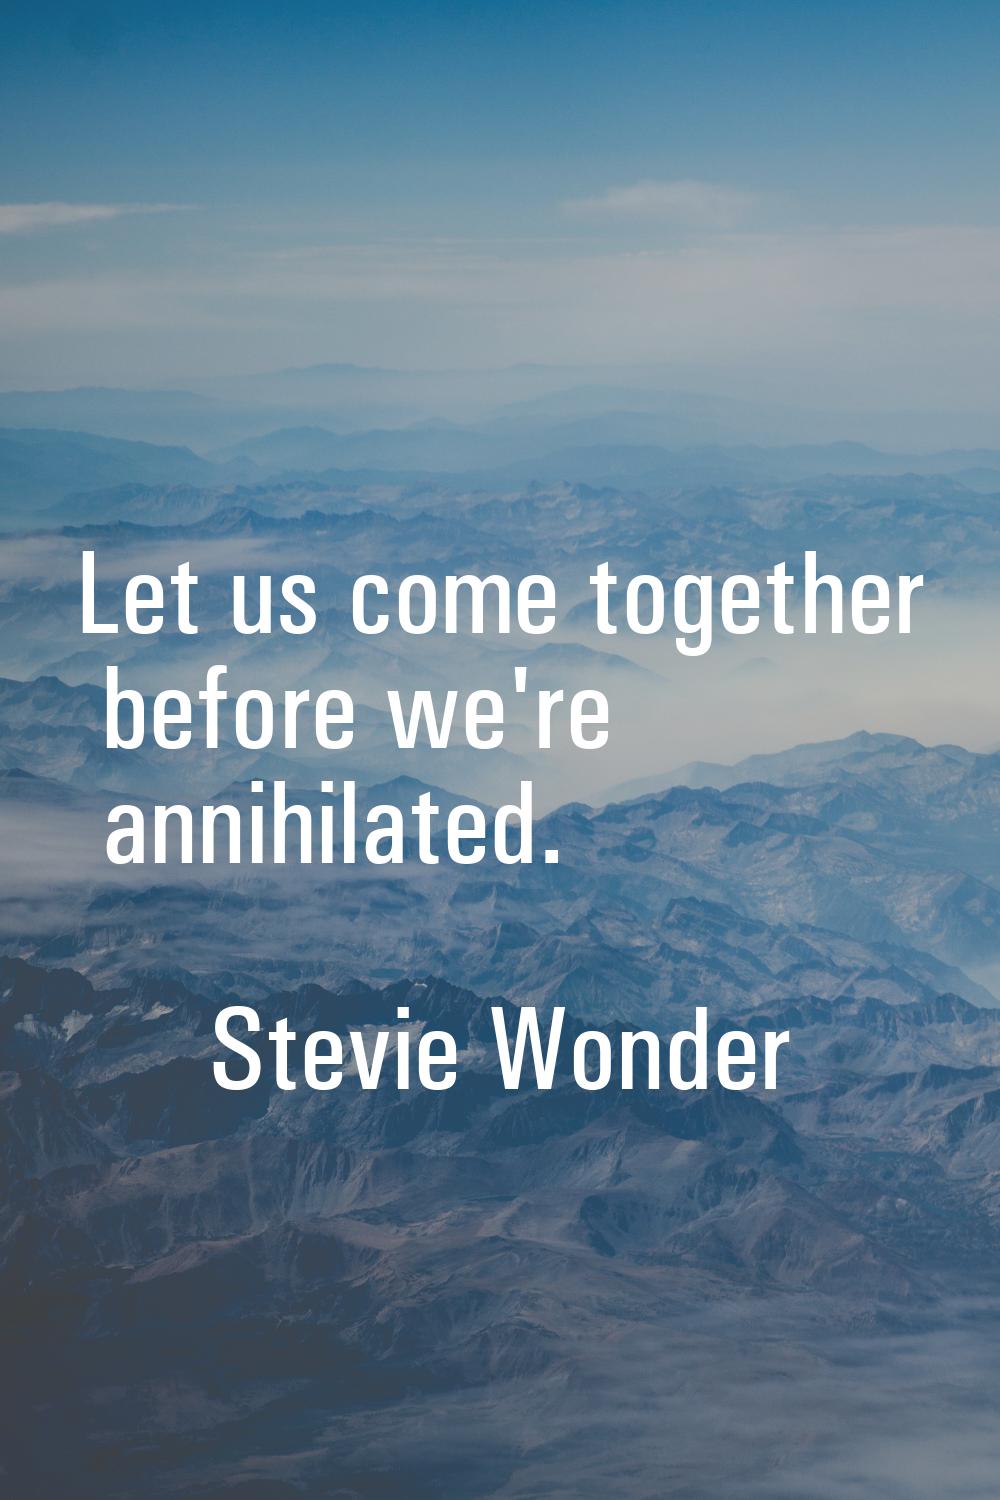 Let us come together before we're annihilated.